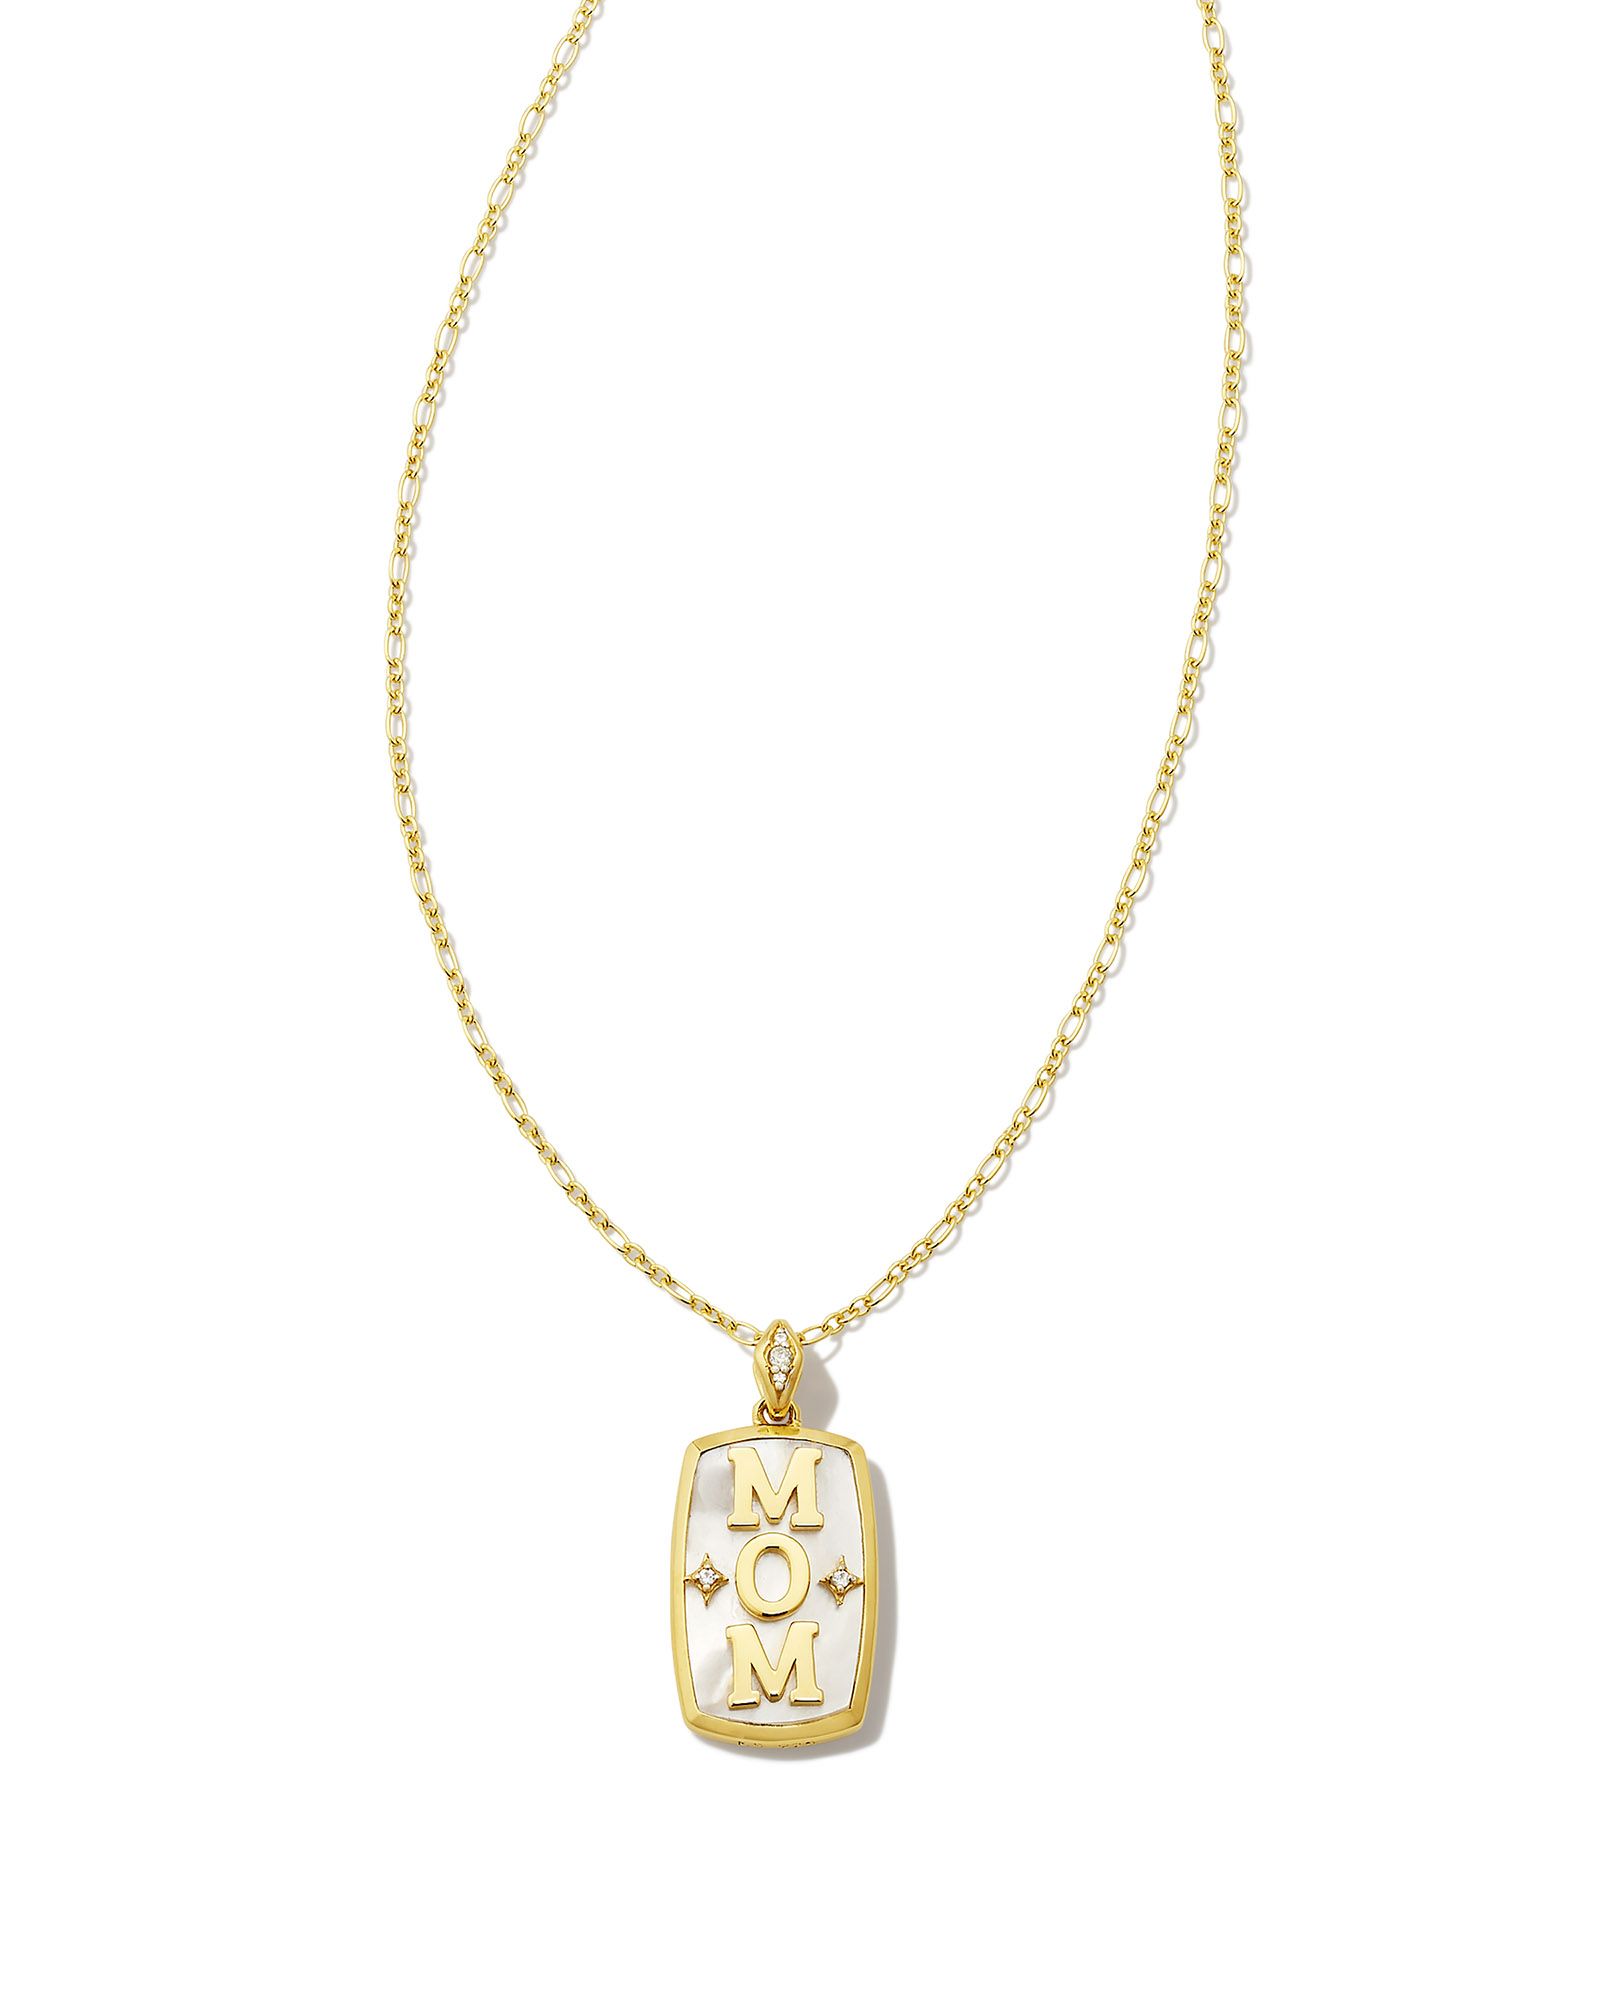 Mom 18k Gold Vermeil Stone Tag Necklace in Ivory Mother-of-Pearl | Kendra Scott | Kendra Scott